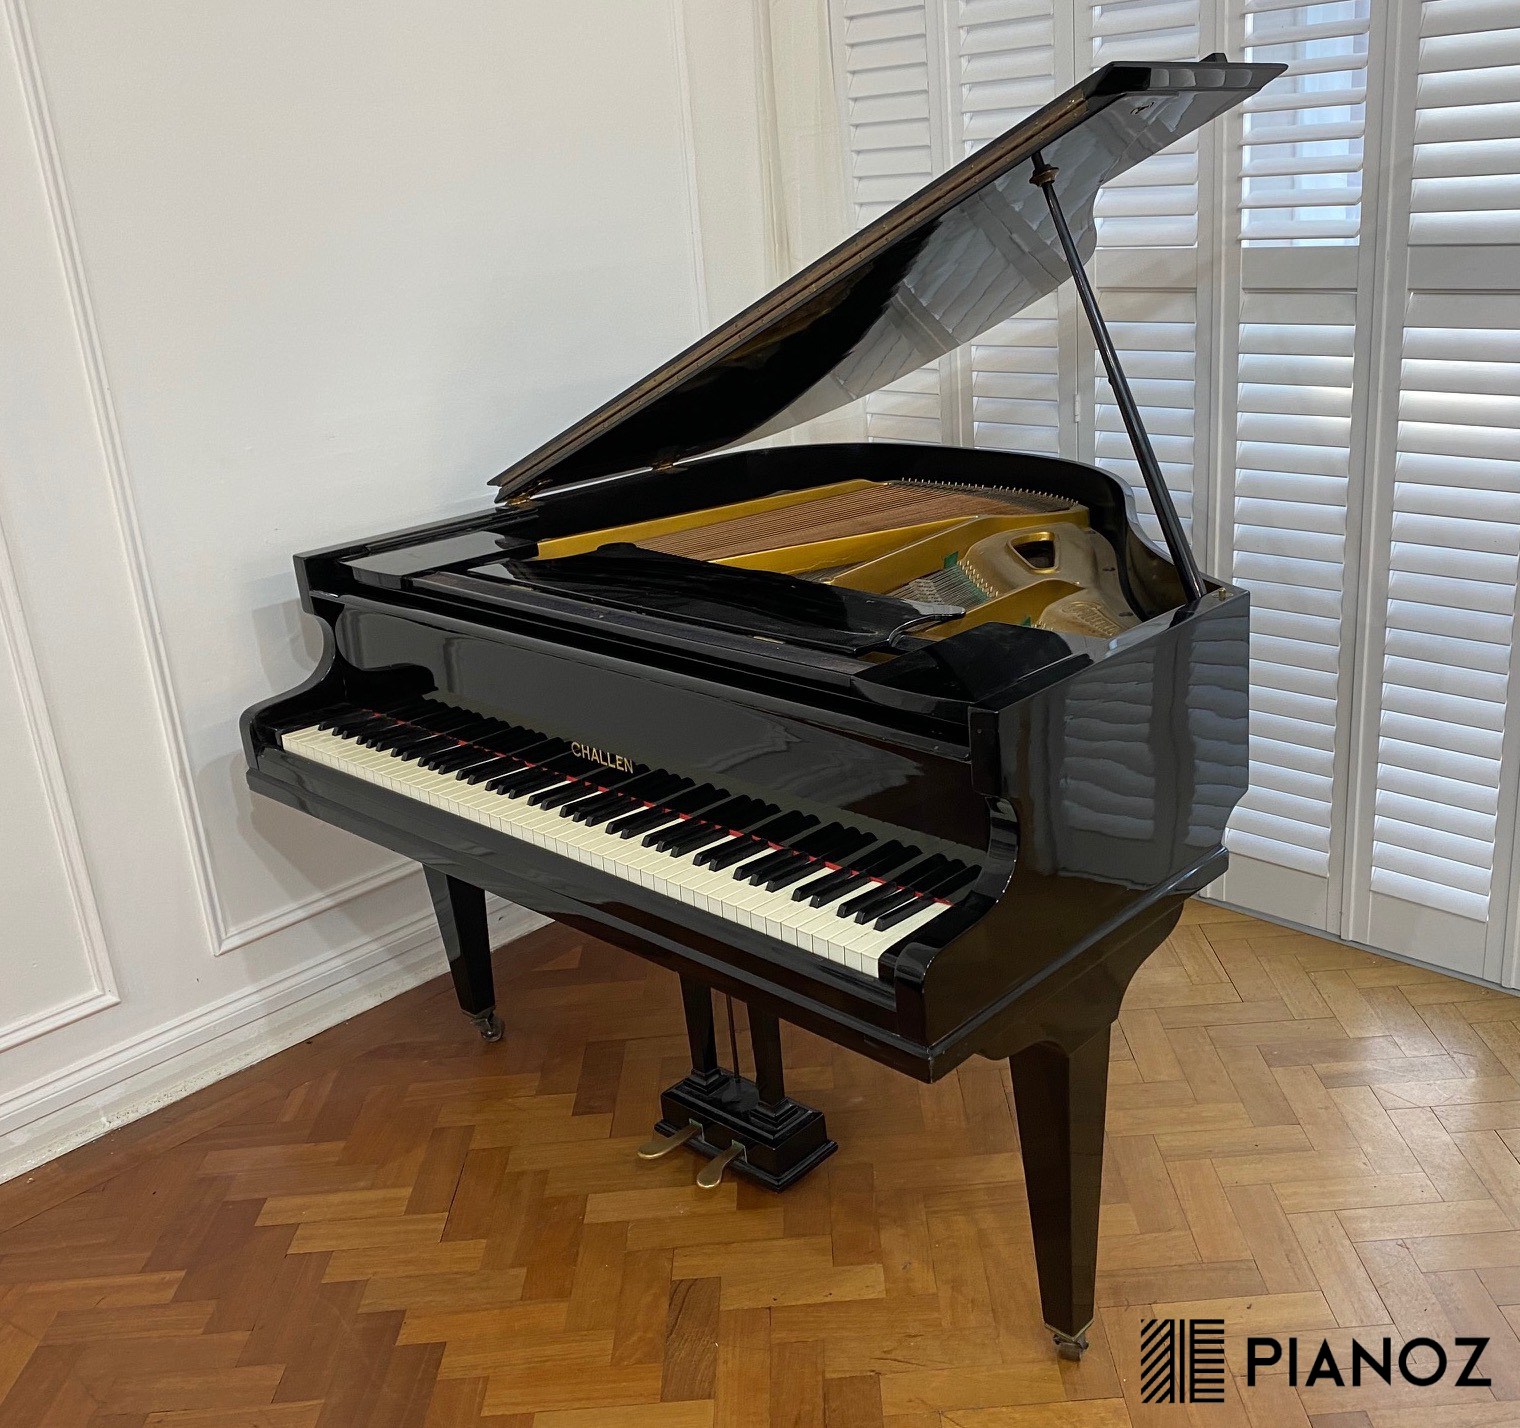 Challen Black High Gloss Baby Grand Piano piano for sale in UK